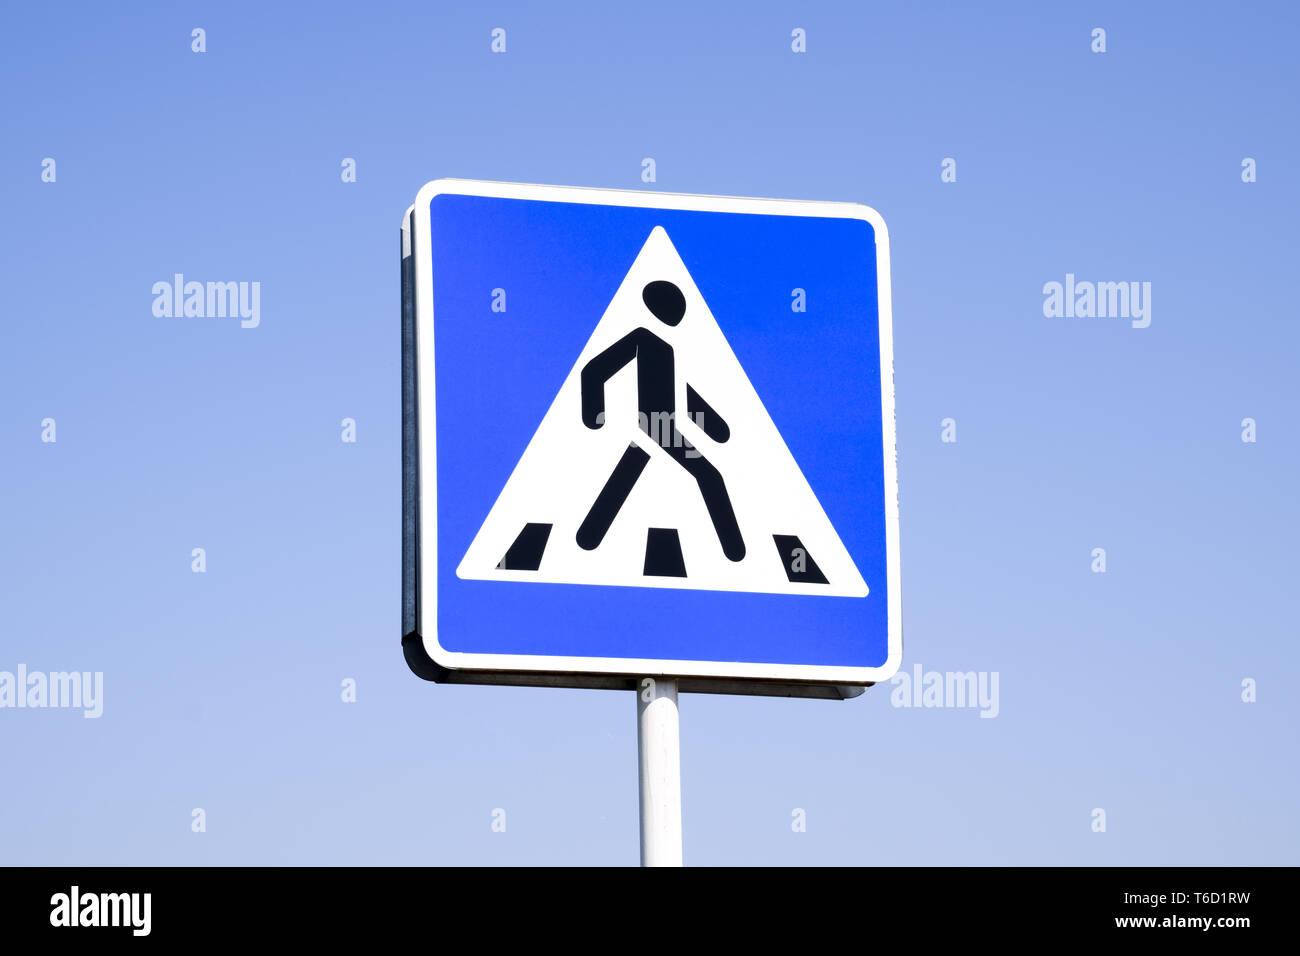 A pedestrian crossing sign. Sign on a blue sky background. Stock Photo